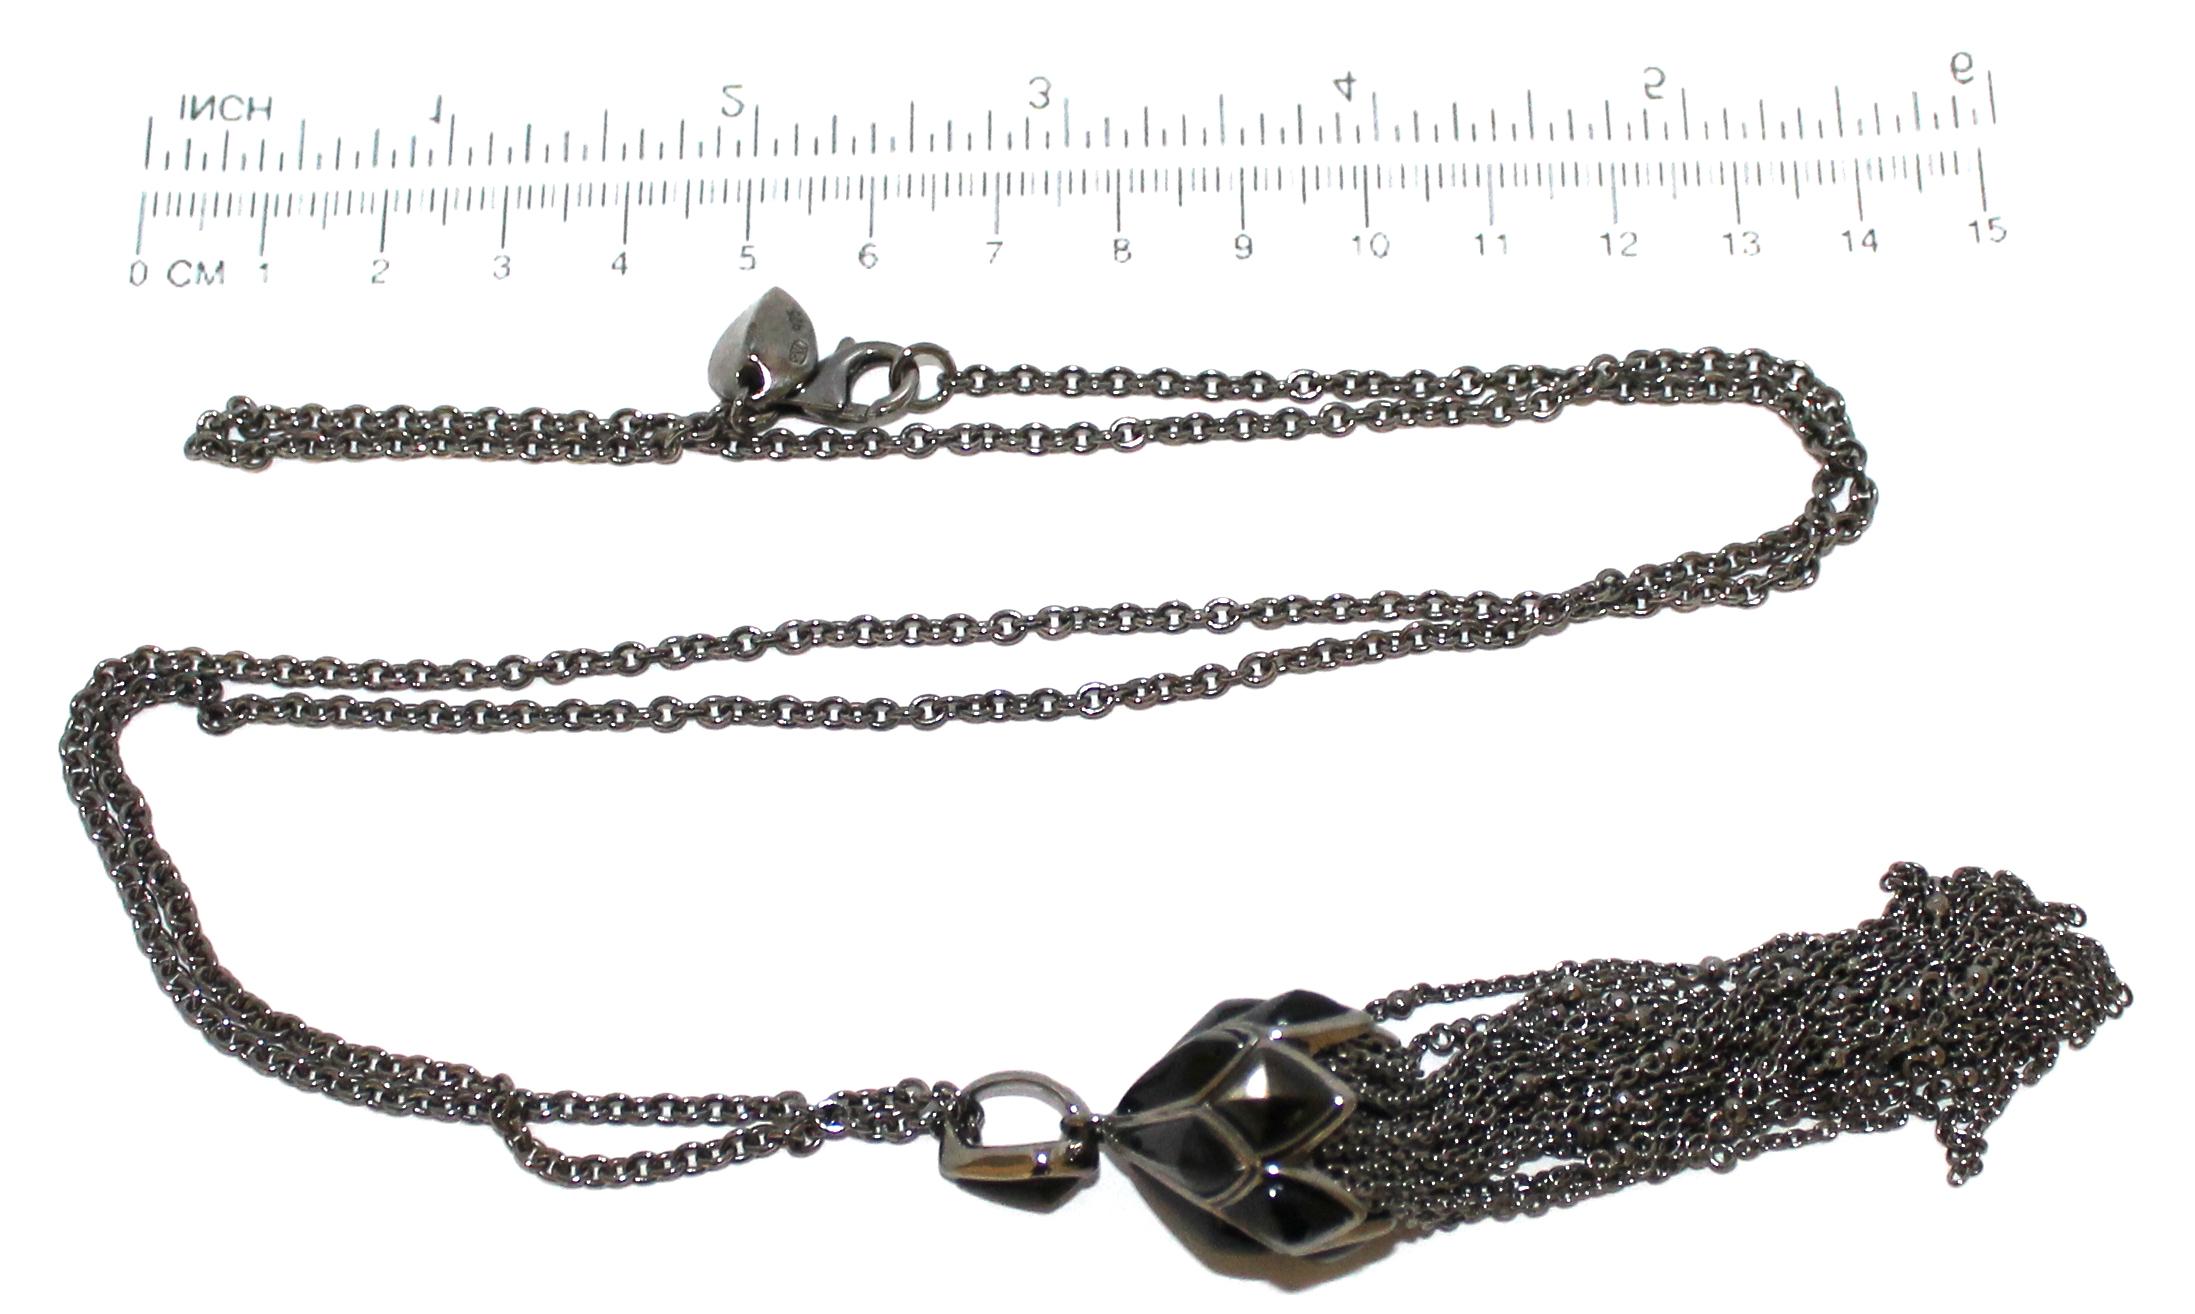 A decorative blackened silver tassel pendant with chain by Stephen Webster, London hallmarked.